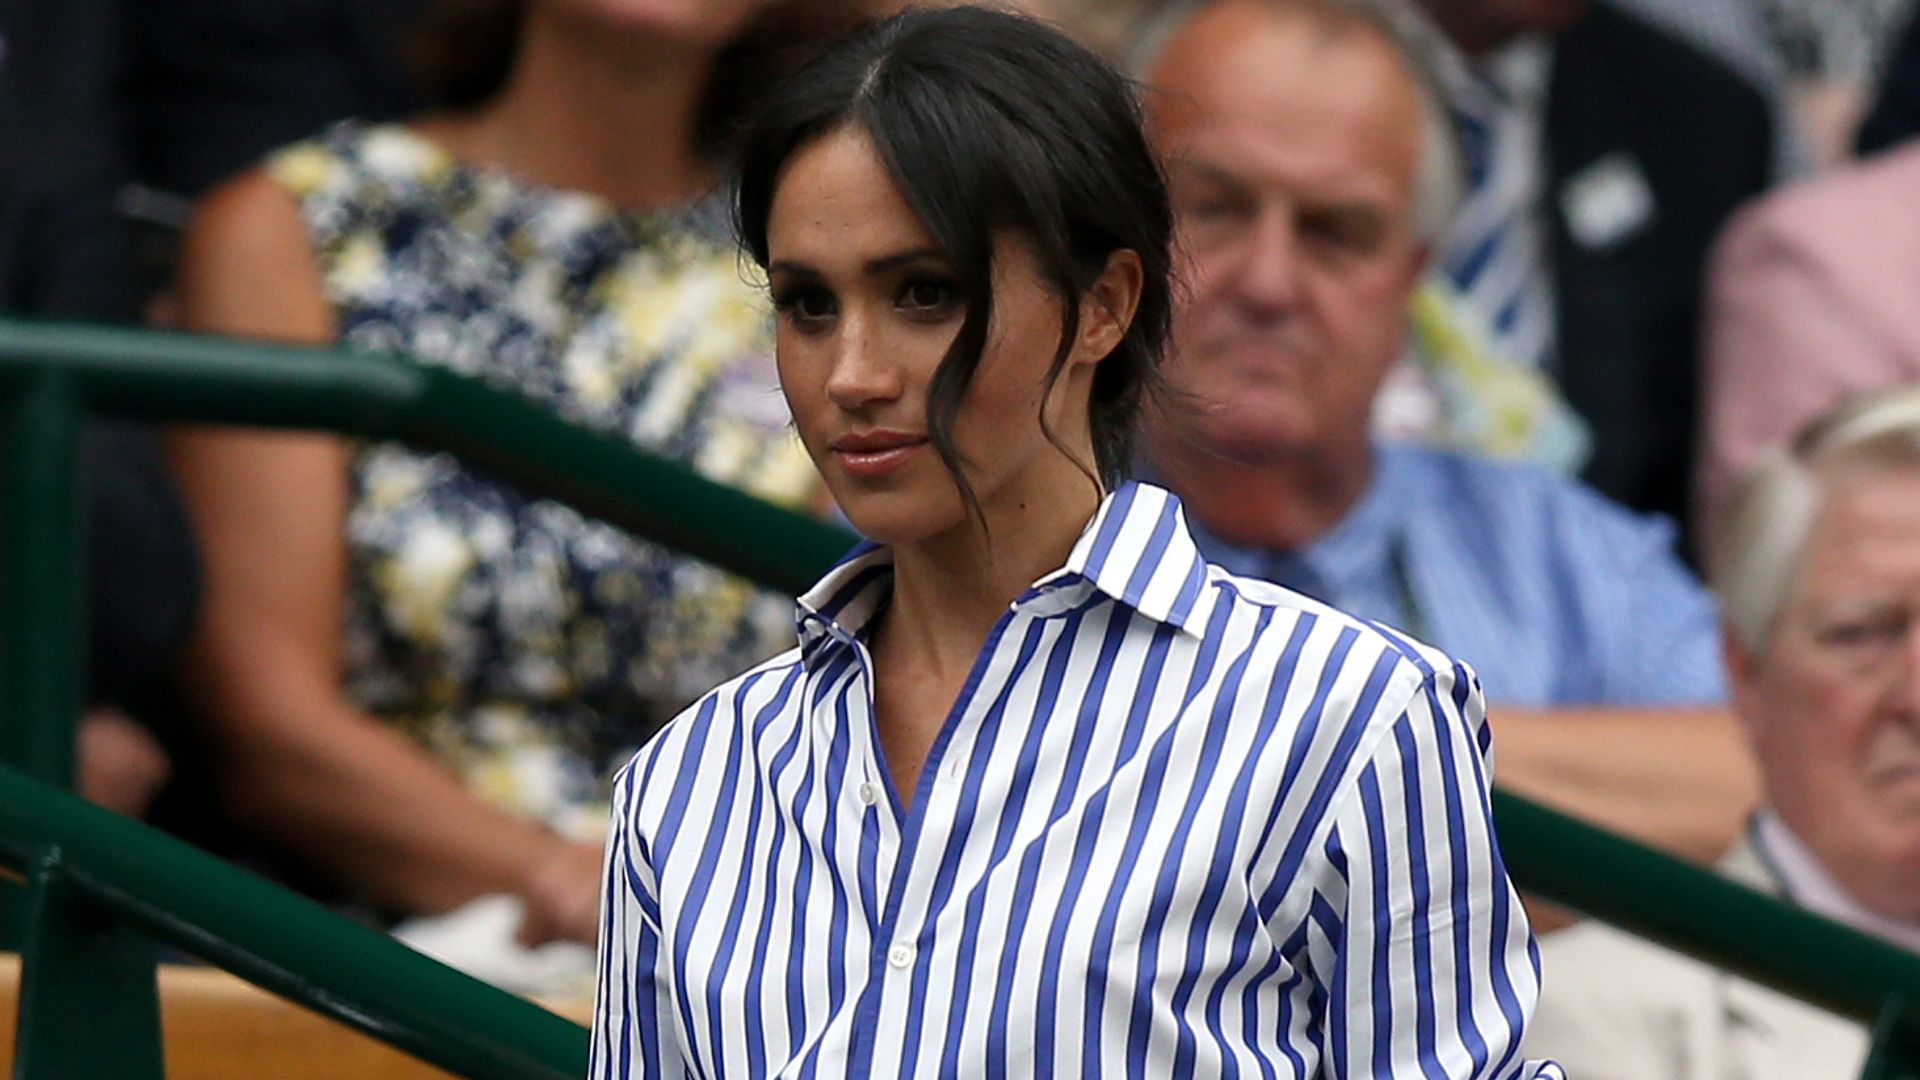 Meghan Markle attends the Wimbledon Championships in 2018